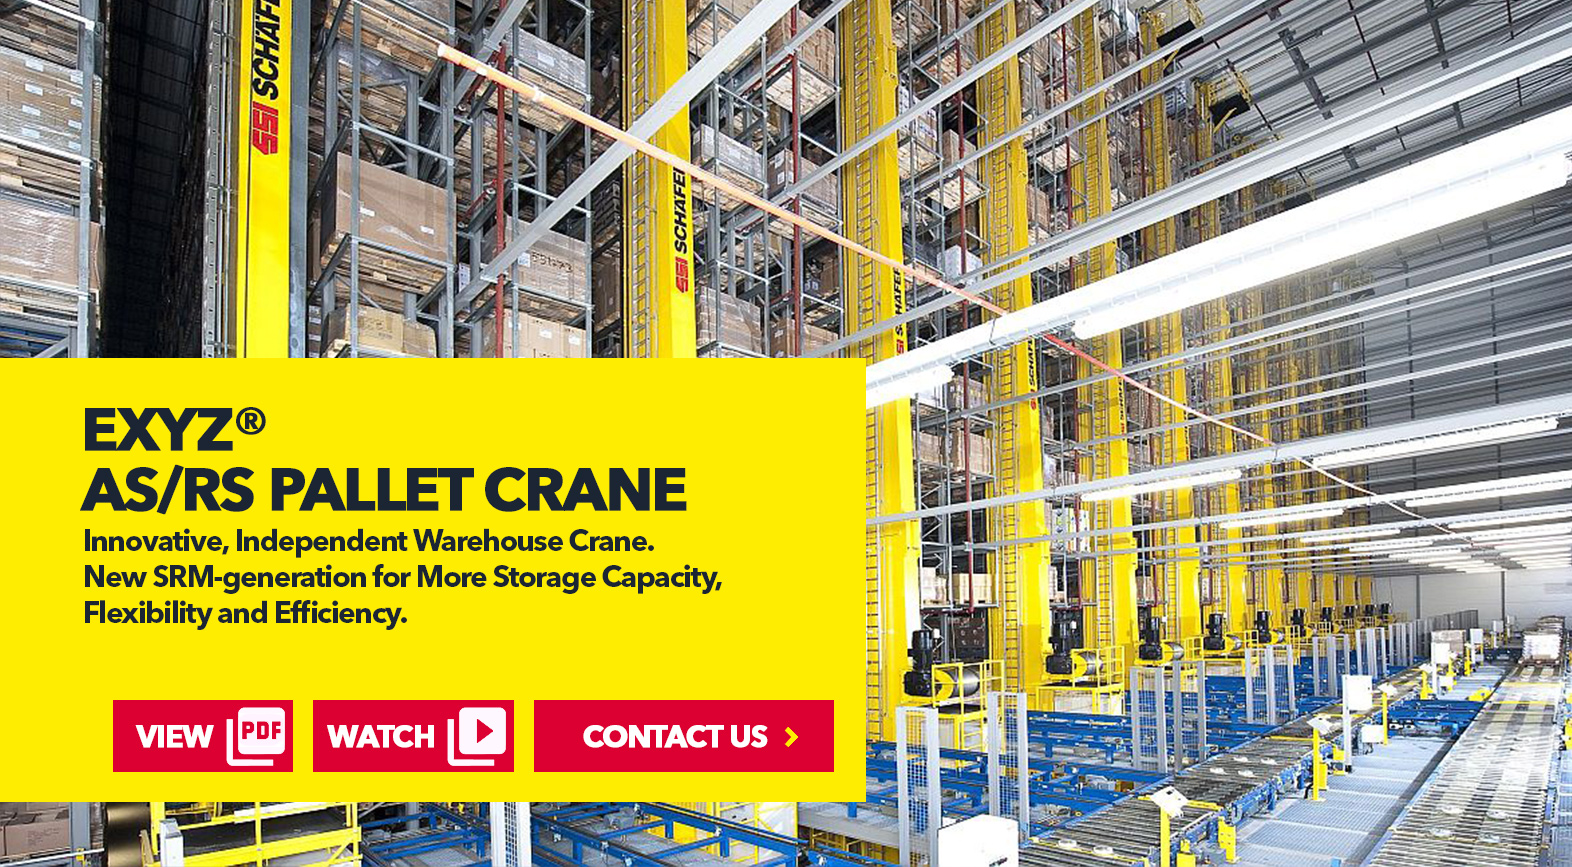 Exyz® AS/RS Pallet Crane by SSI Schaefer USA Download Guide, Watch Video, Contact Us. www.chaefershelving.com